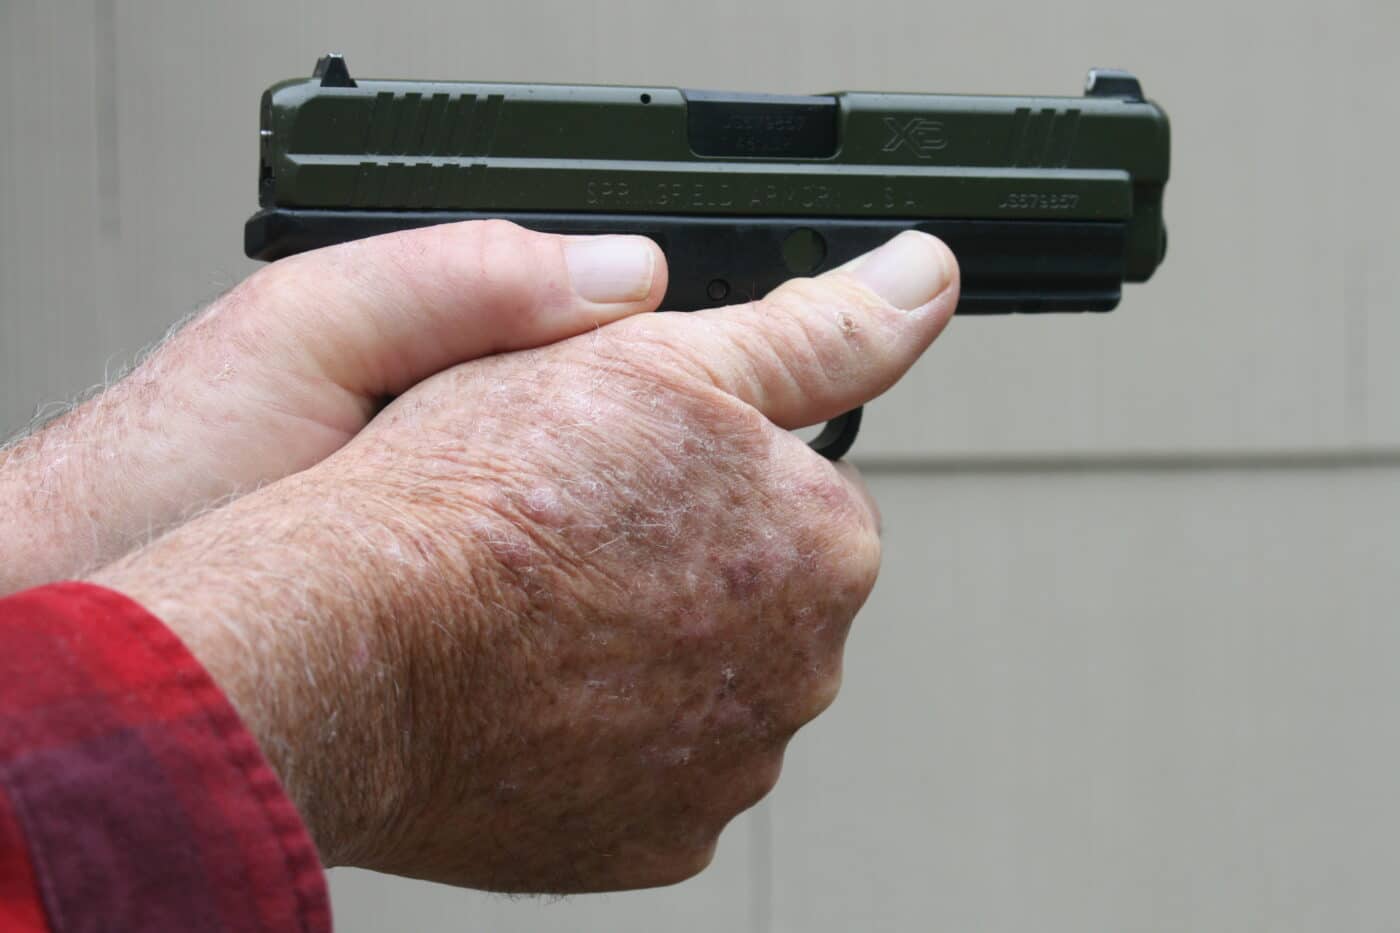 two handed grip on pistol